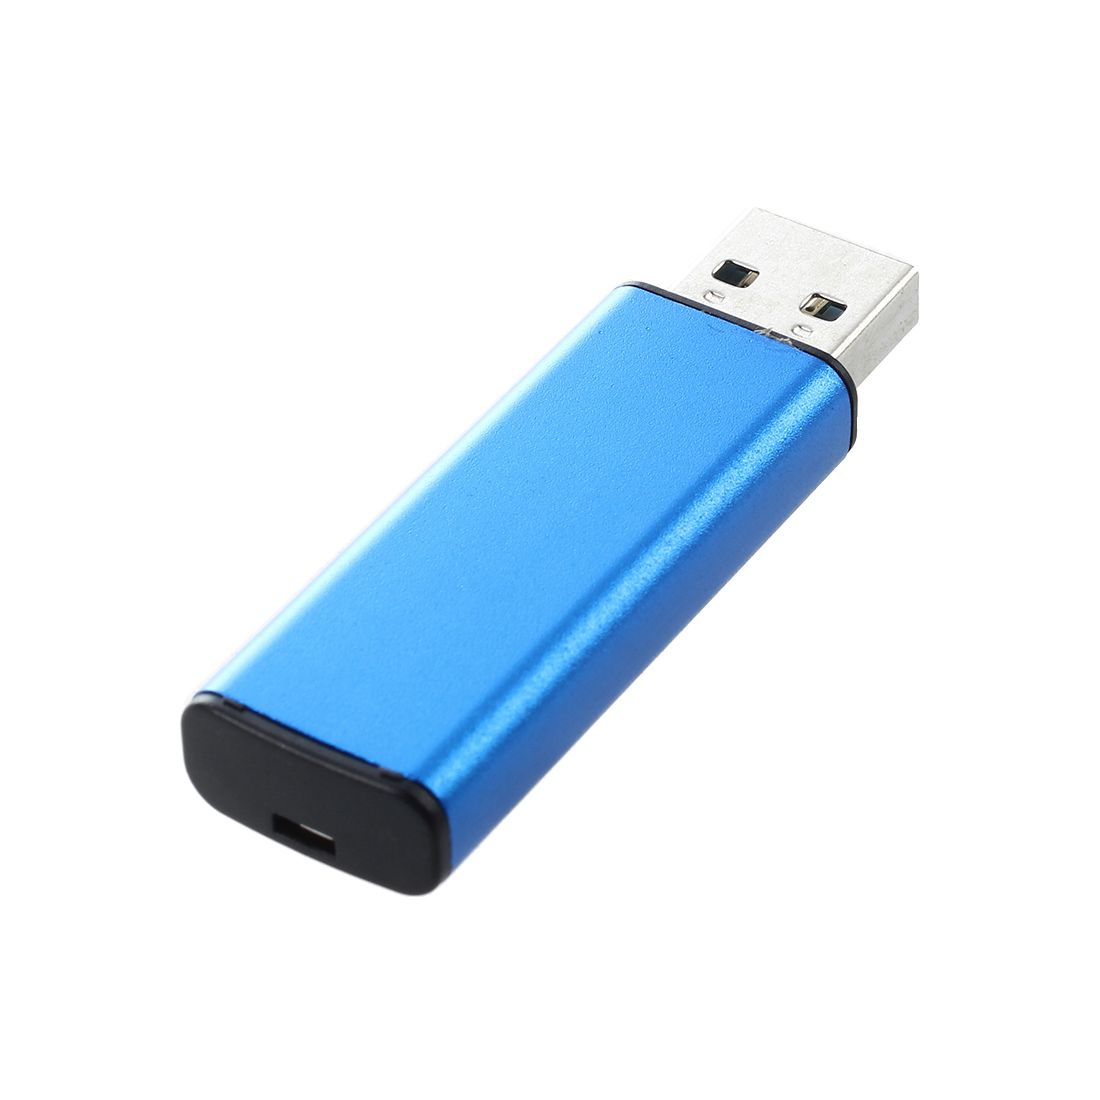 Manual Transfer Files To A Mac From A Memory Stick